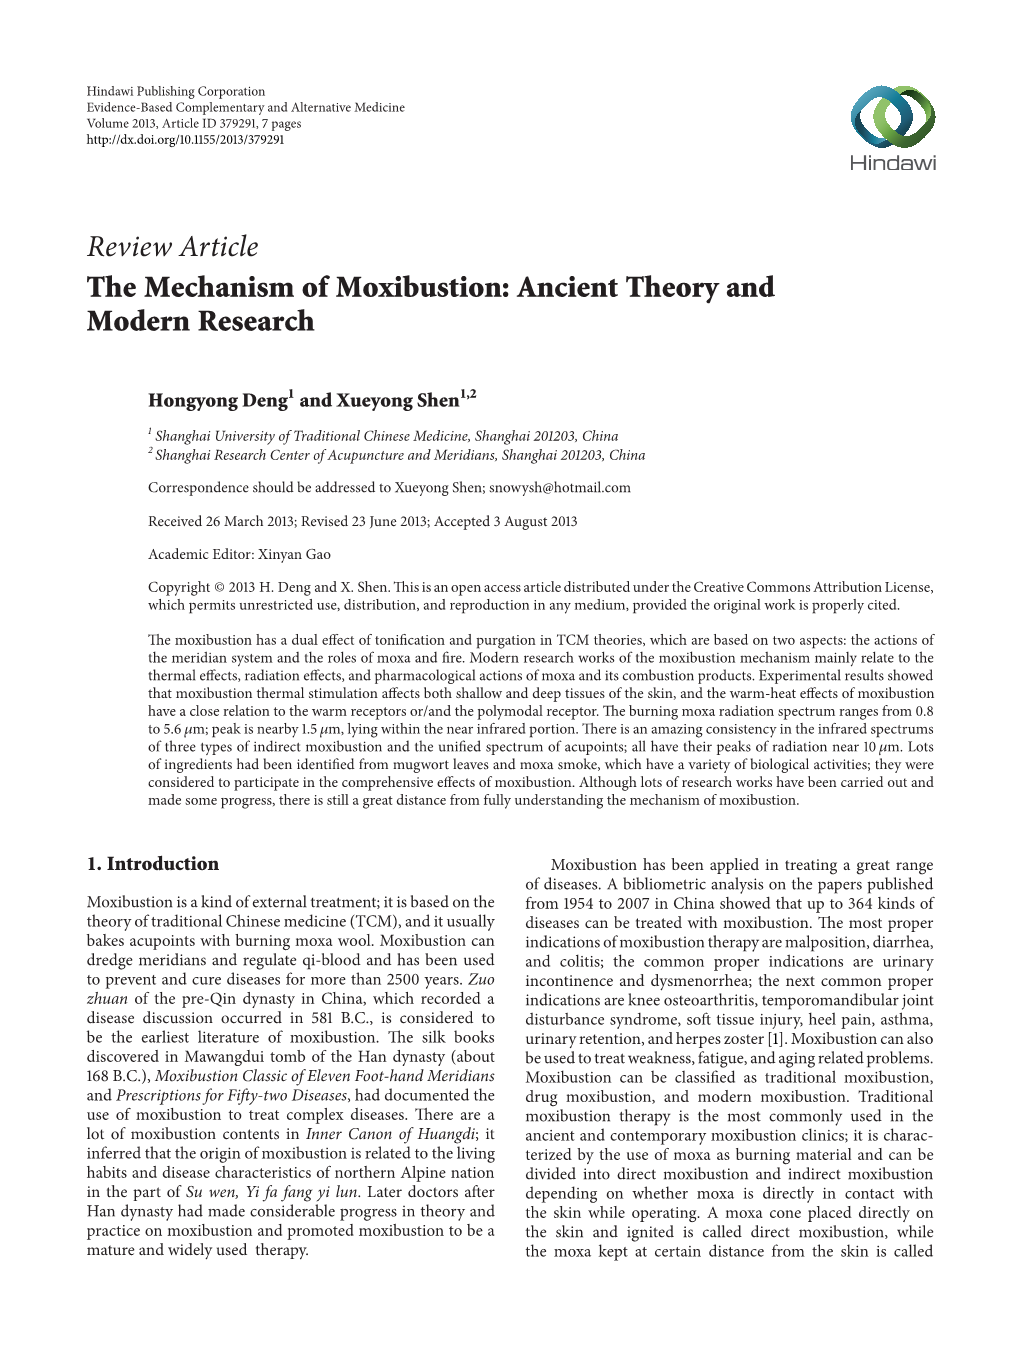 The Mechanism of Moxibustion: Ancient Theory and Modern Research